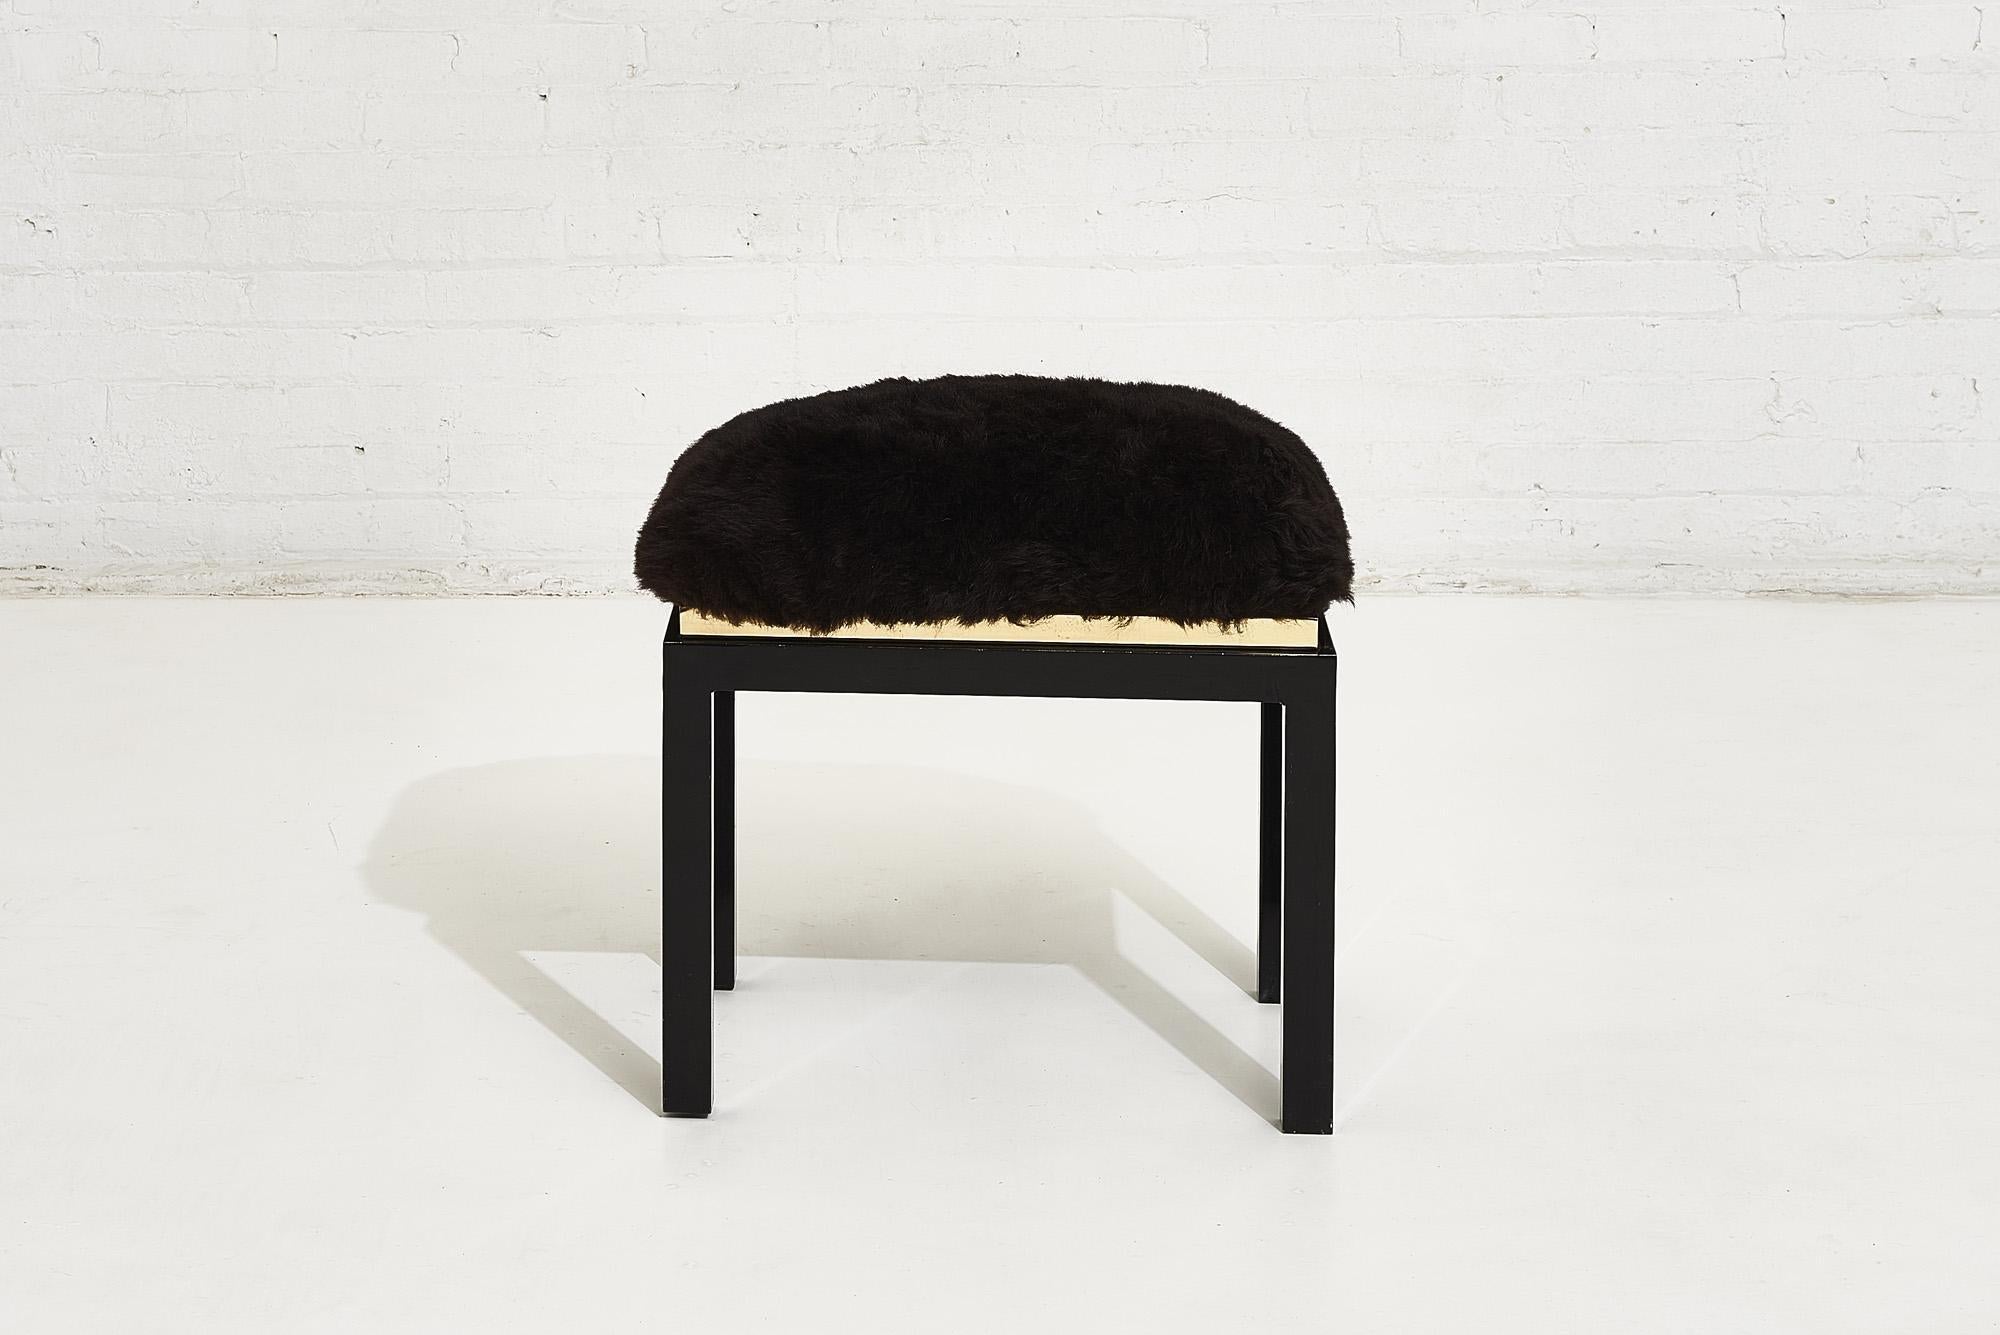 1980’s black black brass fur stool.
Black enameled finish with brass trim and furry sheep skin upholstery.